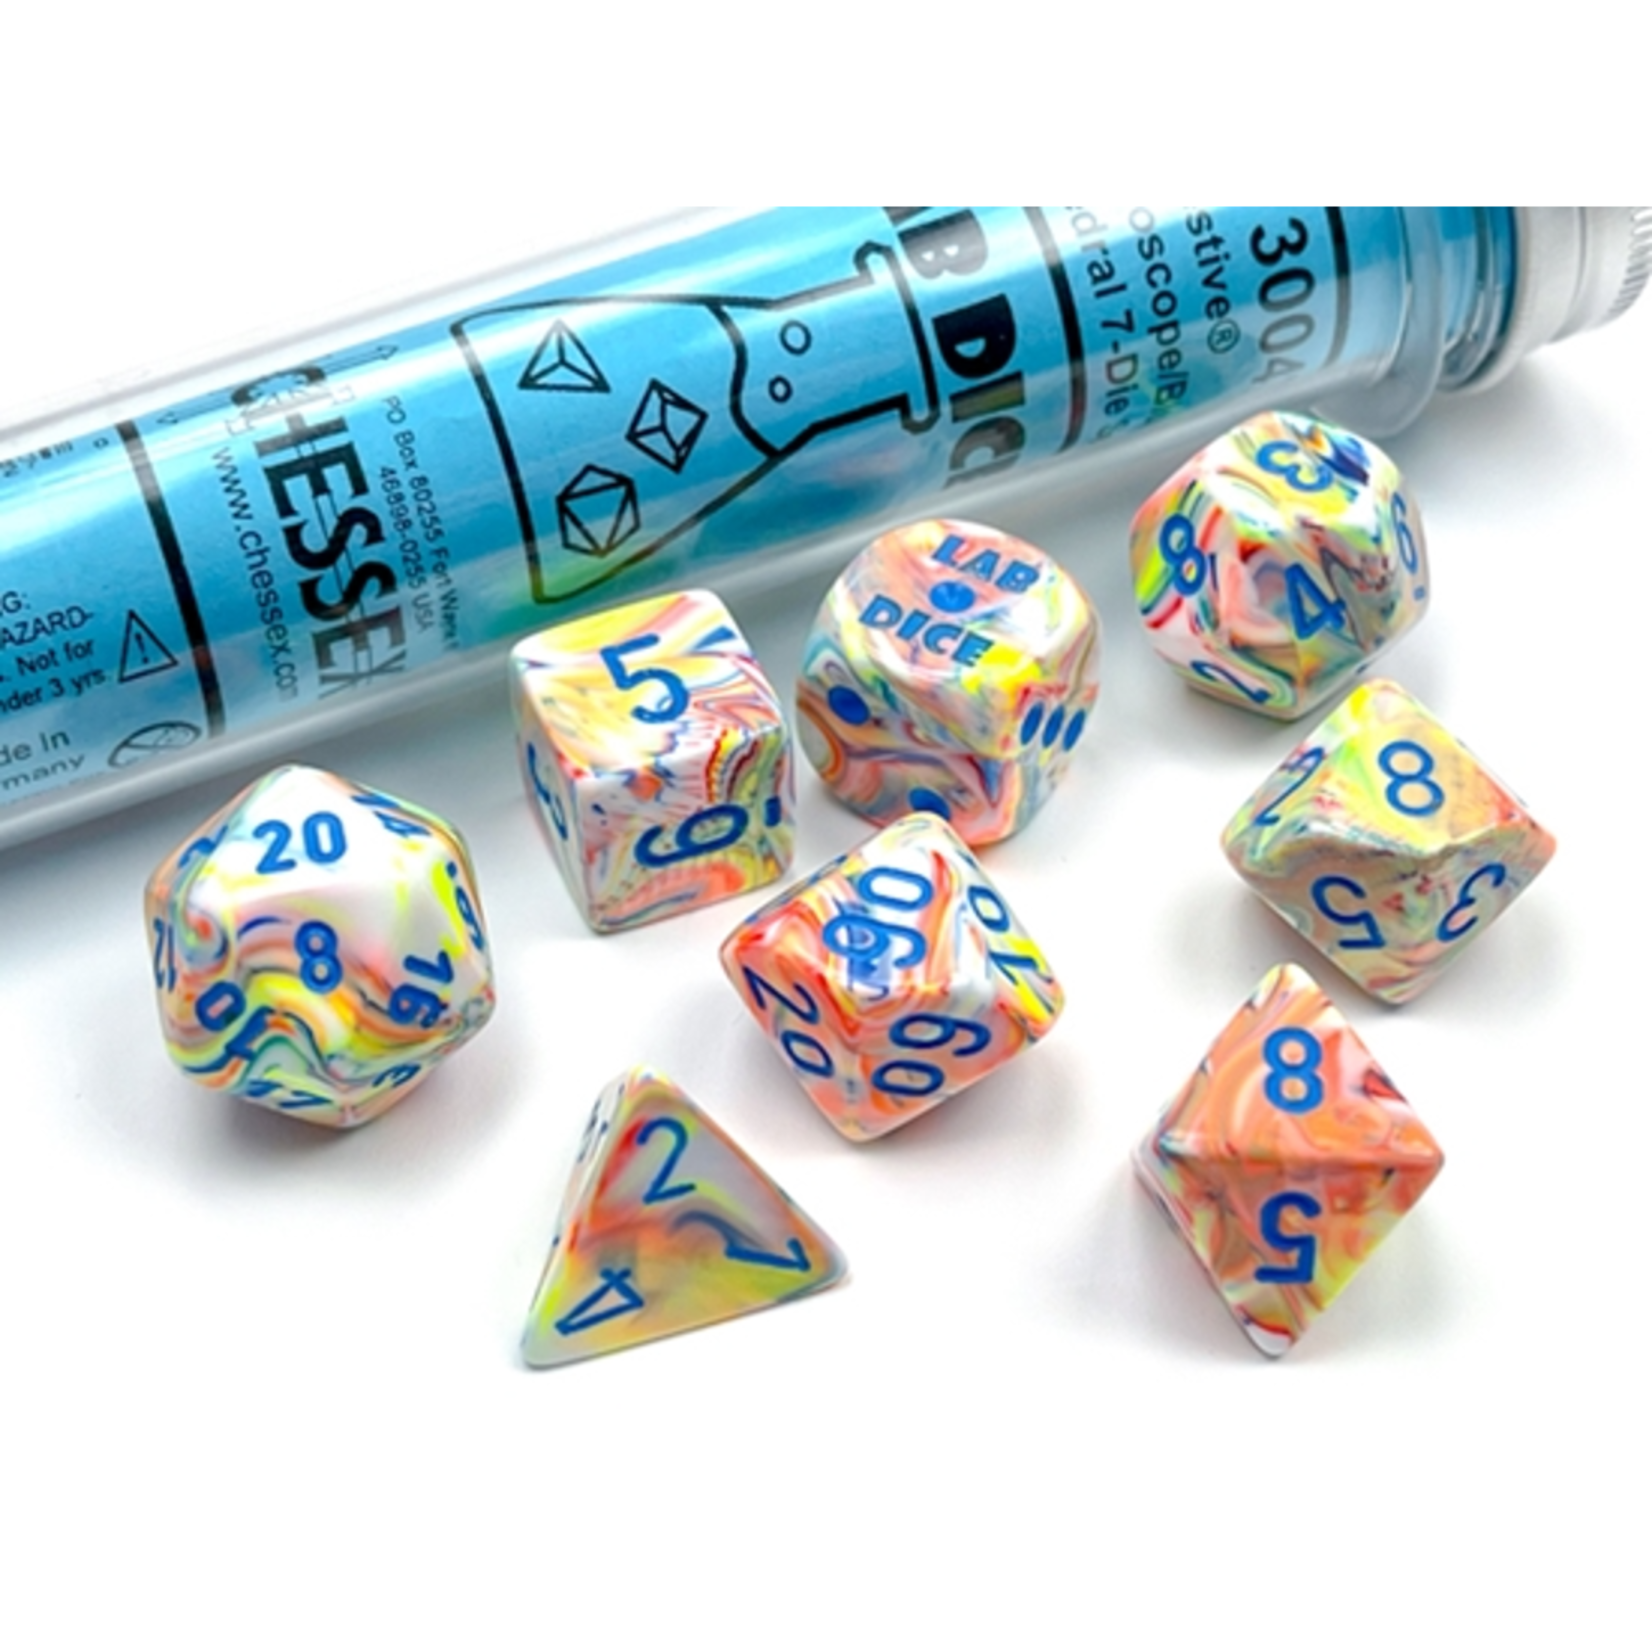 Chessex Chessex Lab Dice Festive Kaleidoscope with Blue Polyhedral 7 die set